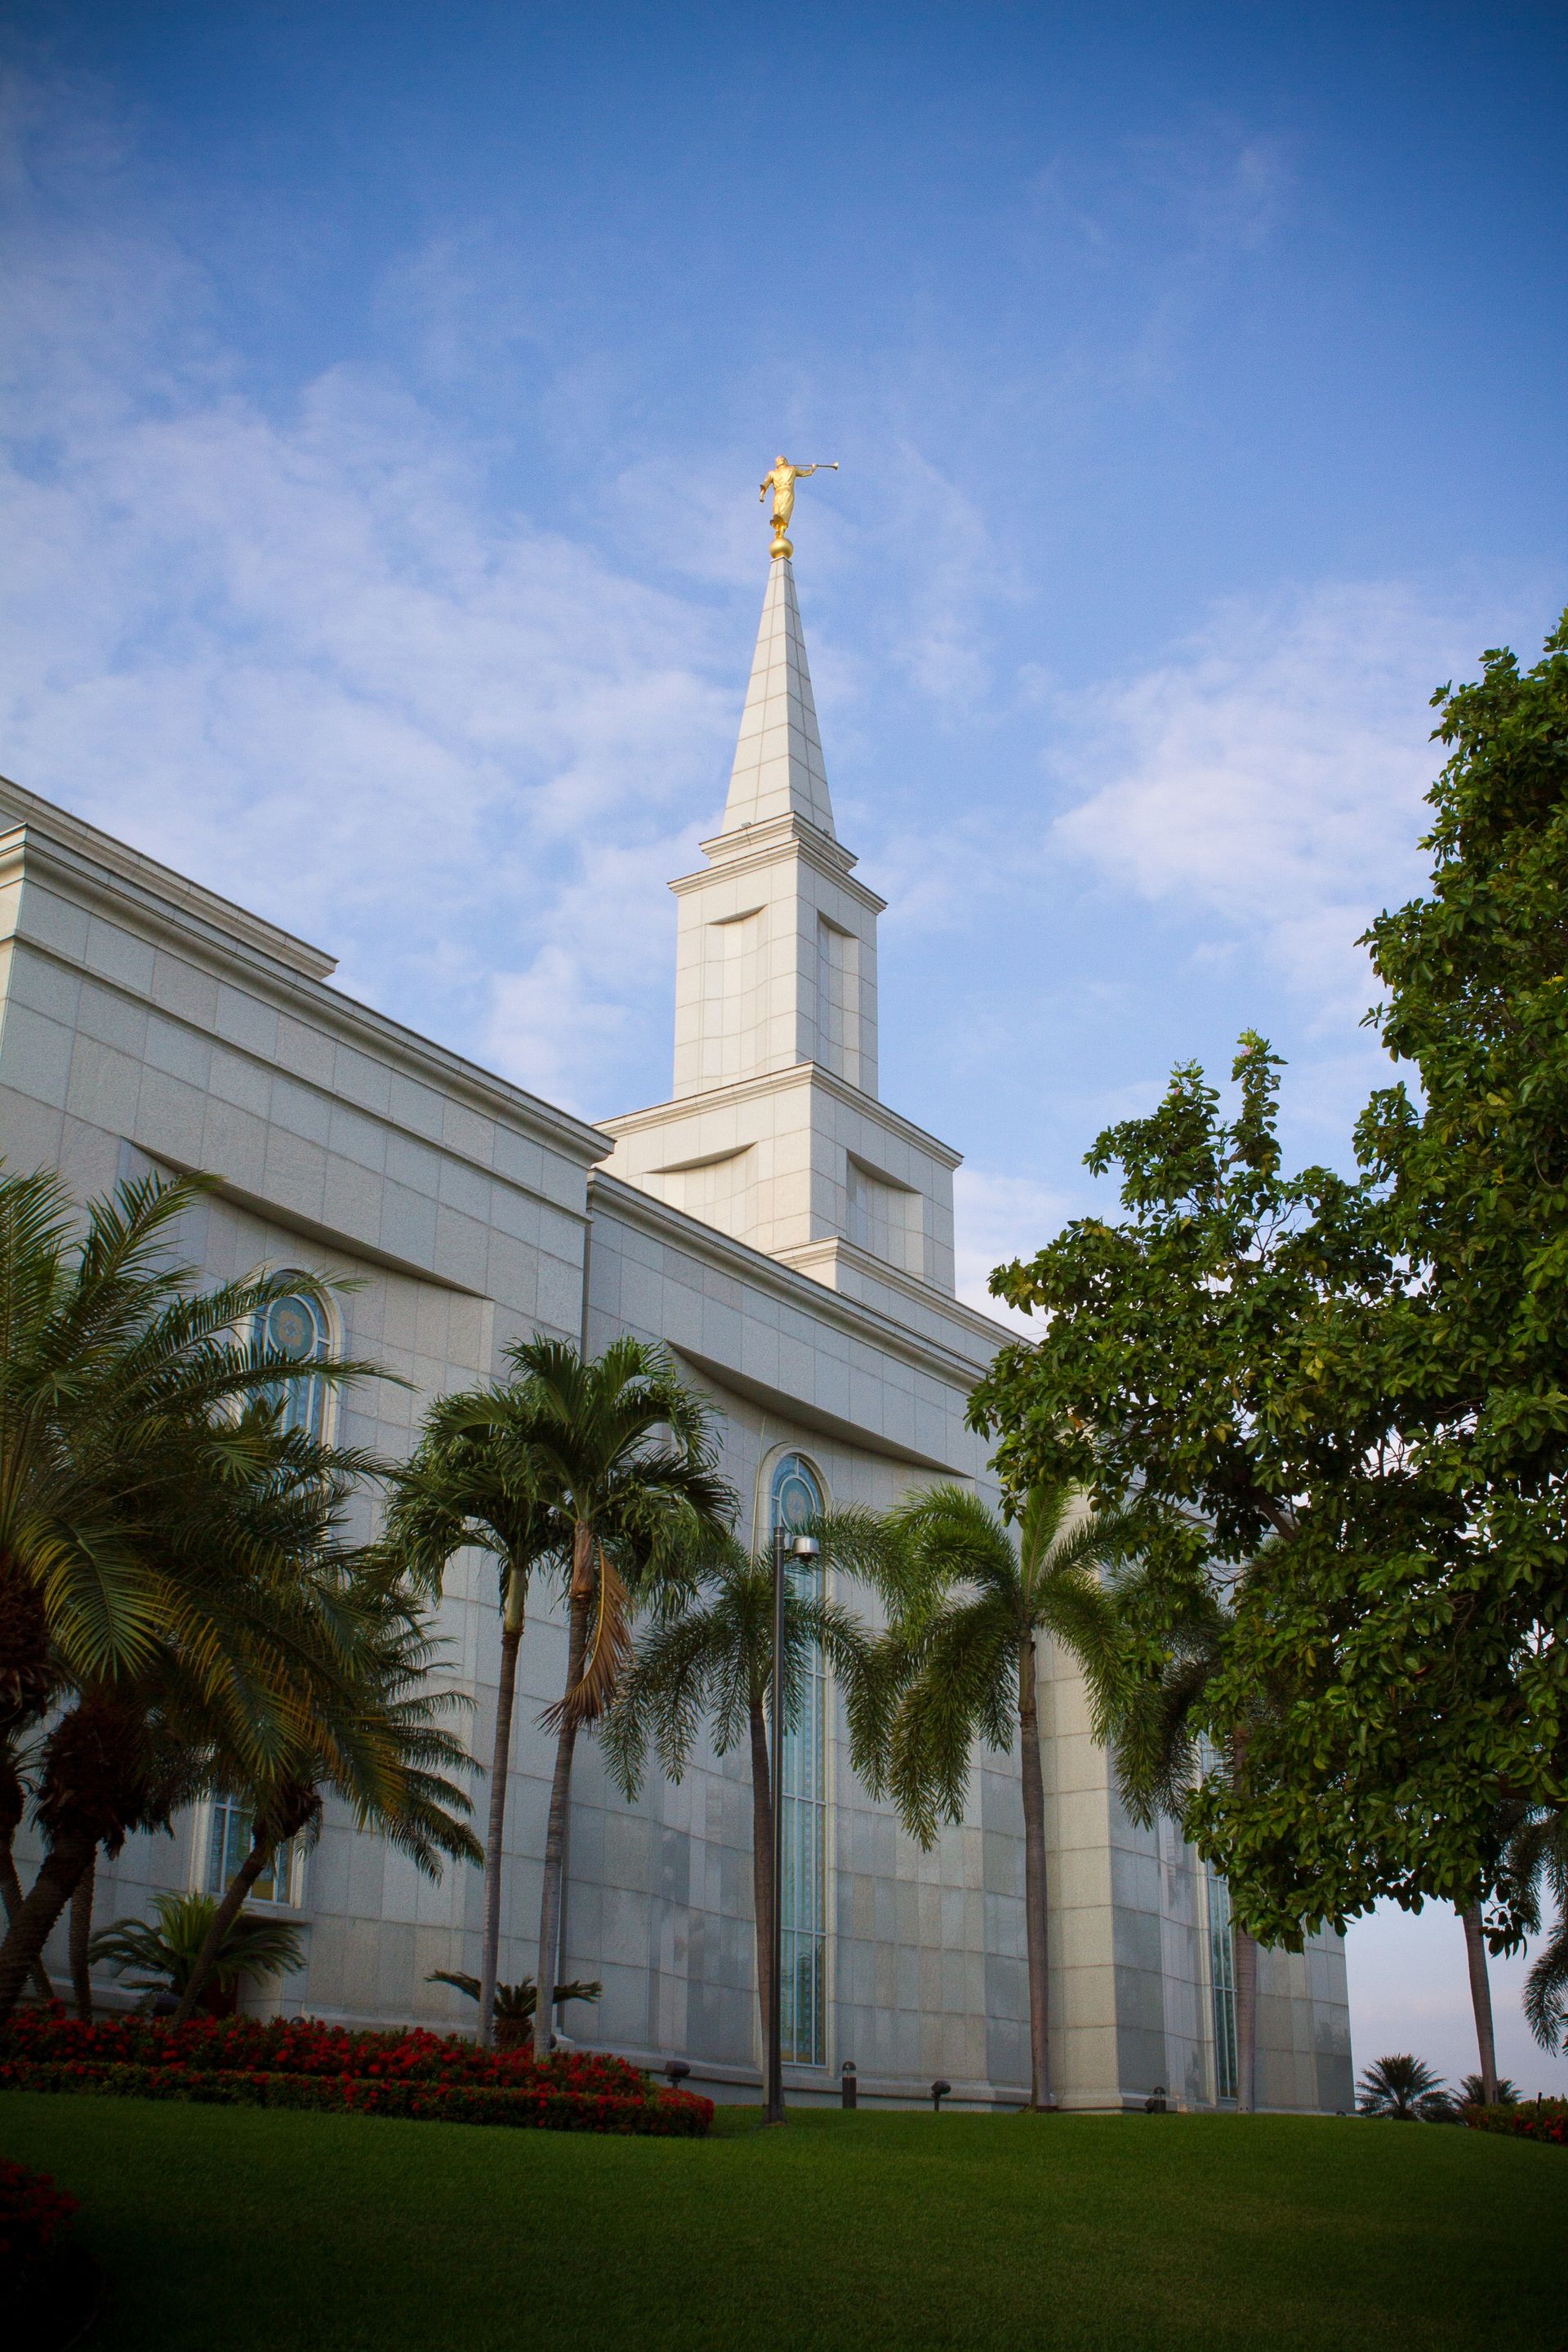 A side view of the Guayaquil Ecuador Temple with its spire.